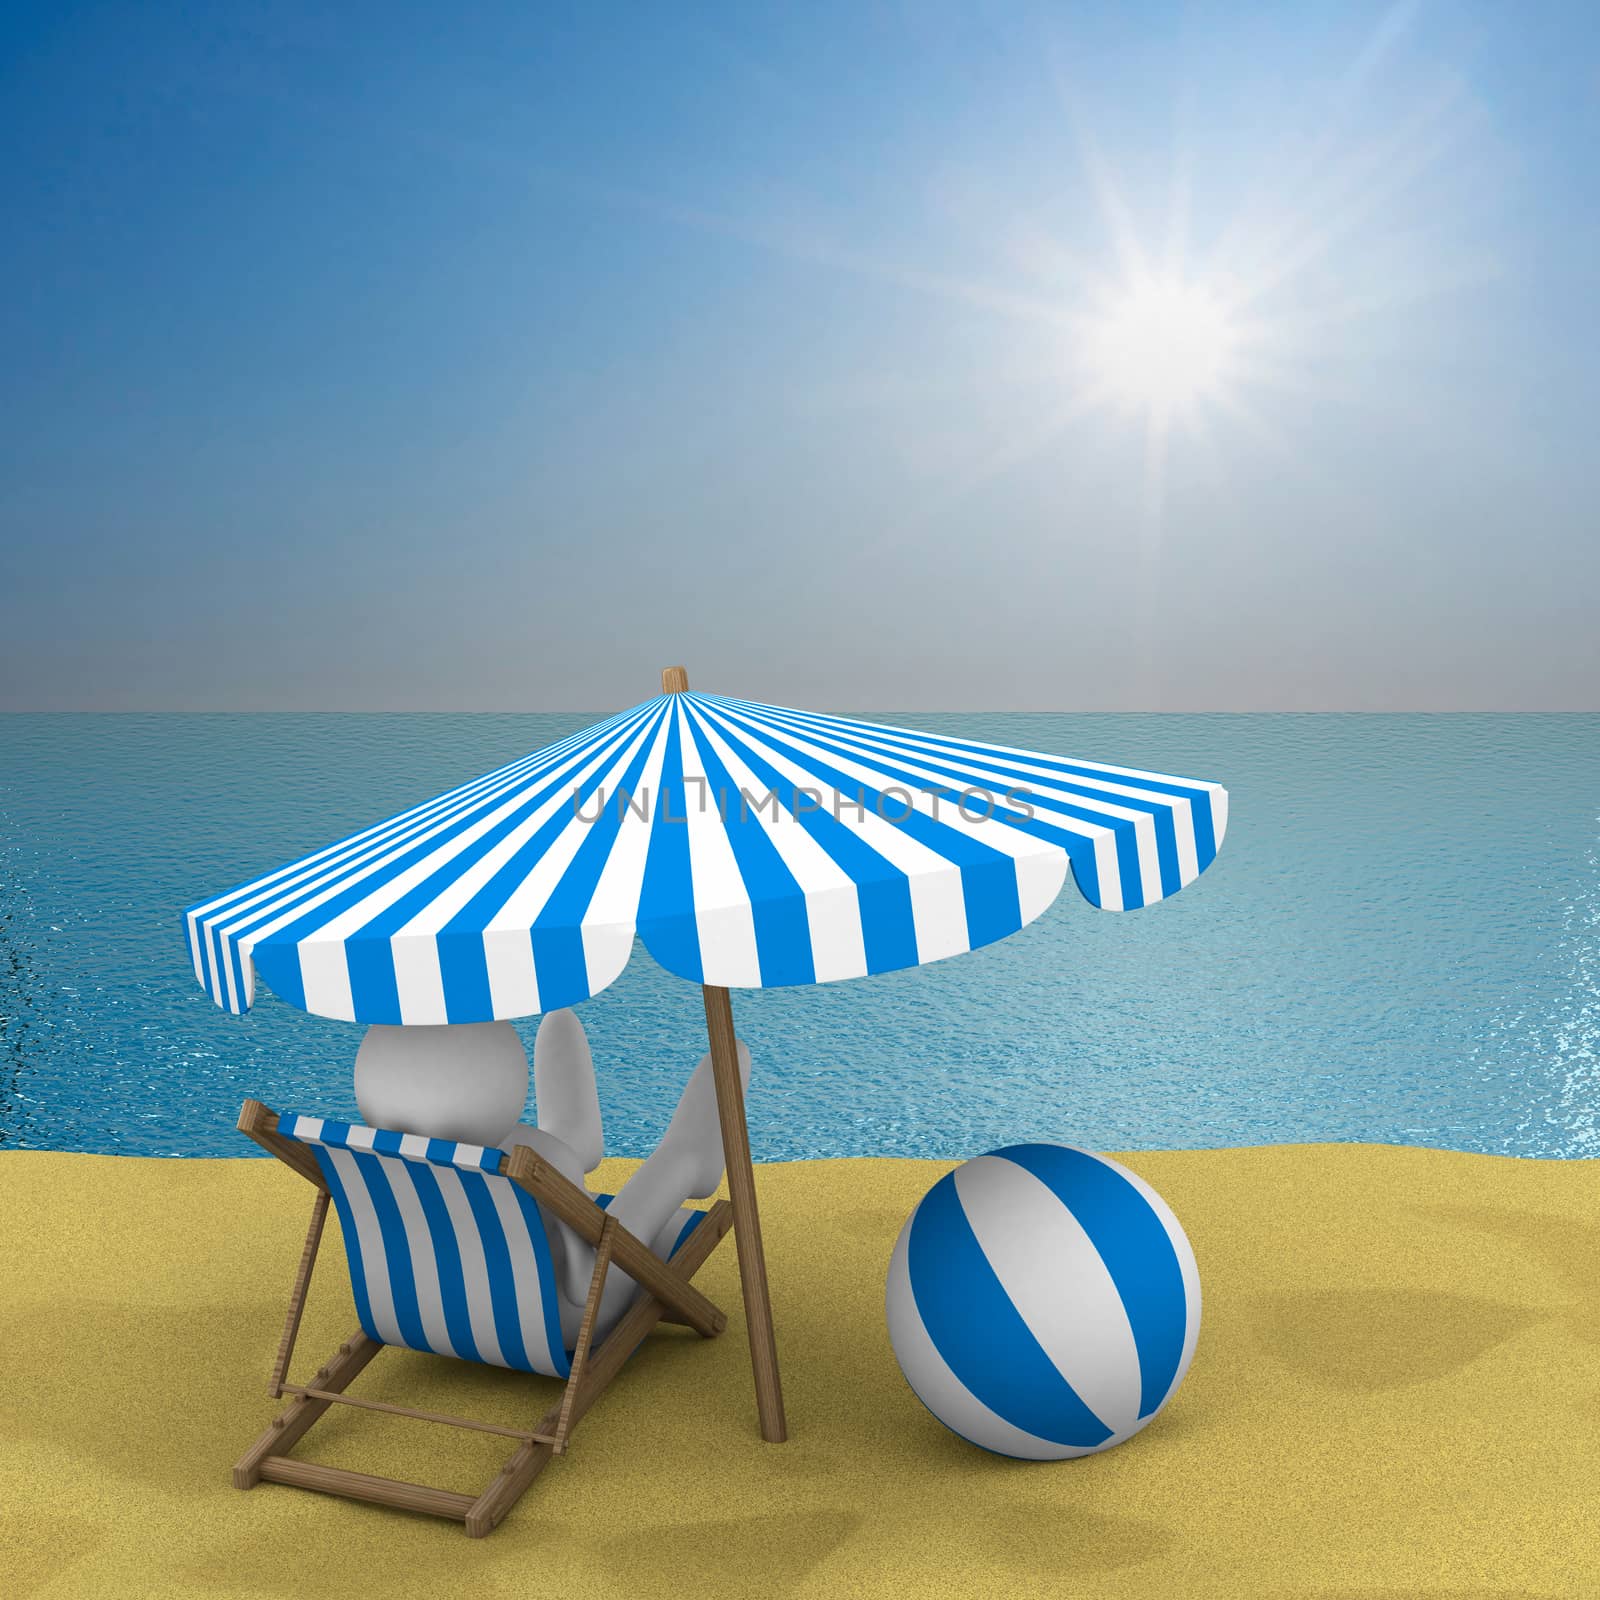 Vacation on the seashore. 3D image by ISerg